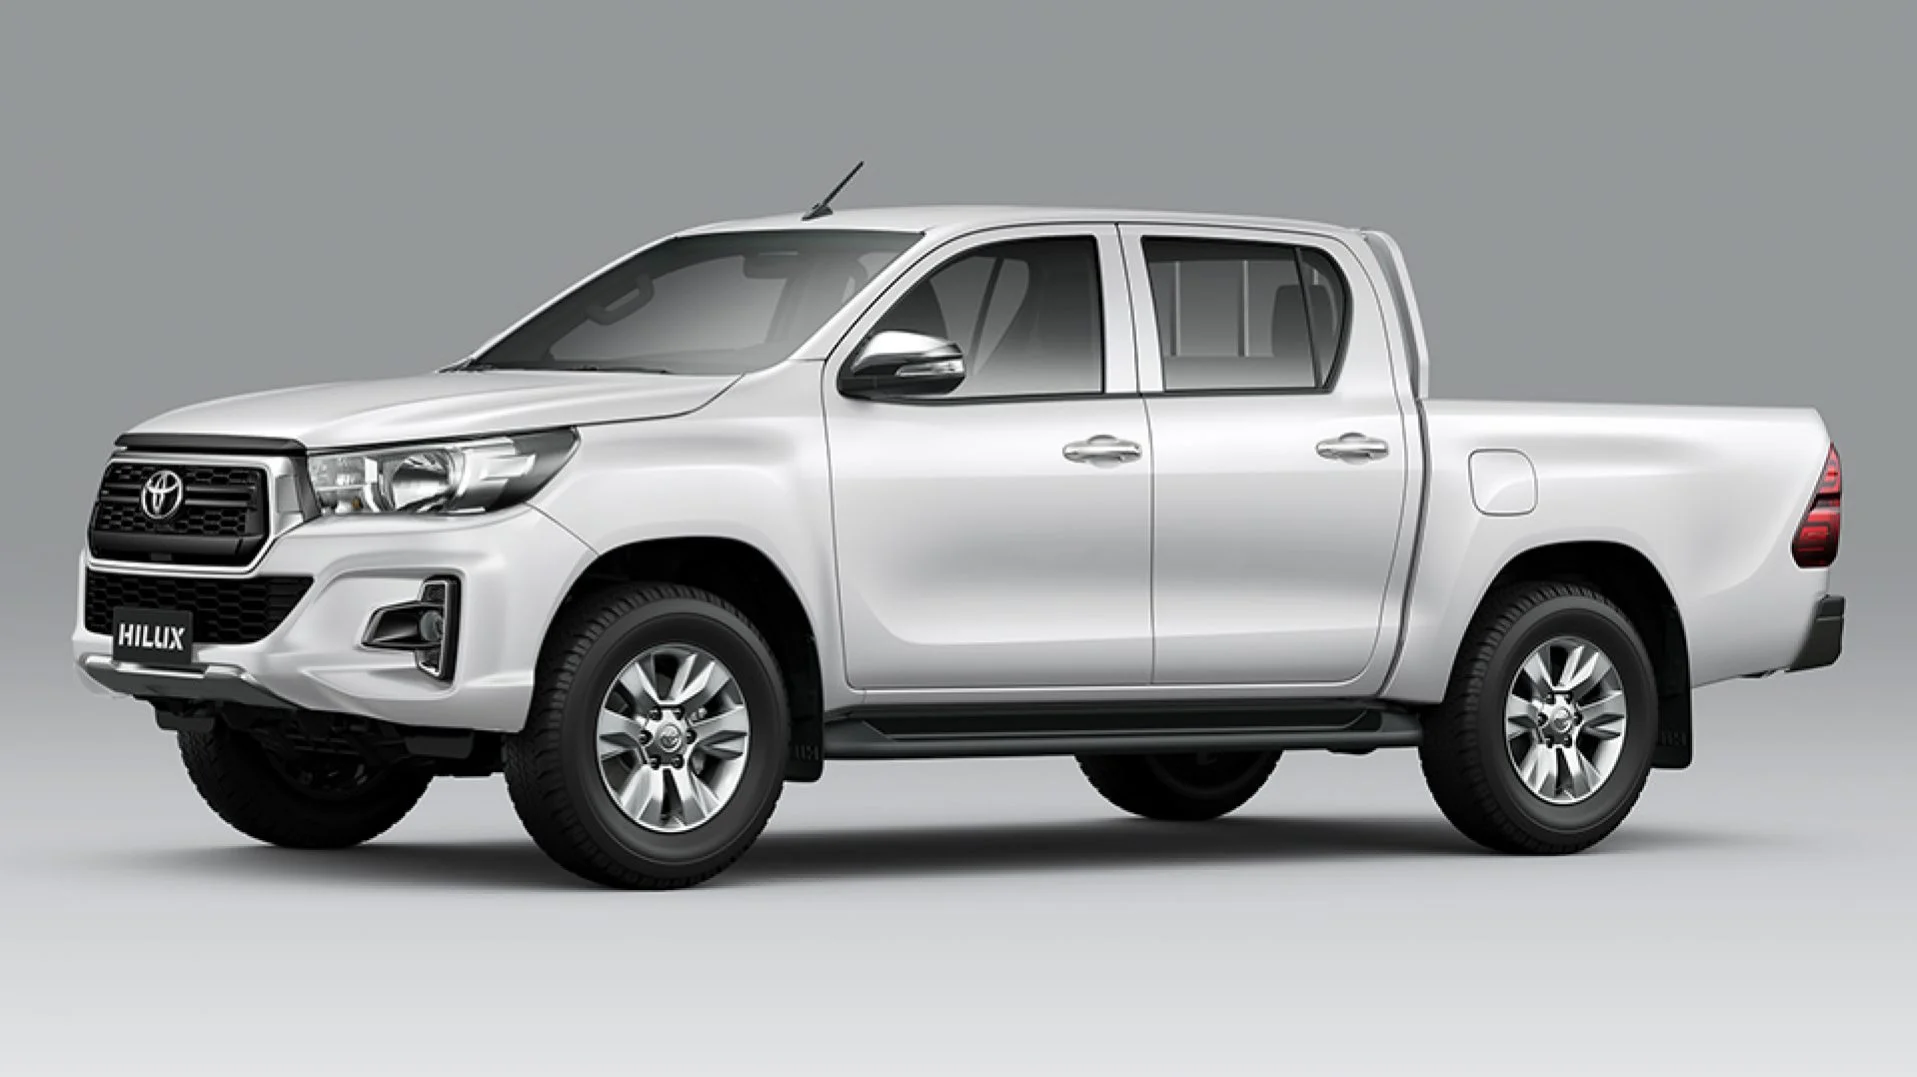 Toyota Hilux for Sale in Mombasa, Nairobi, Kisumu, and other towns